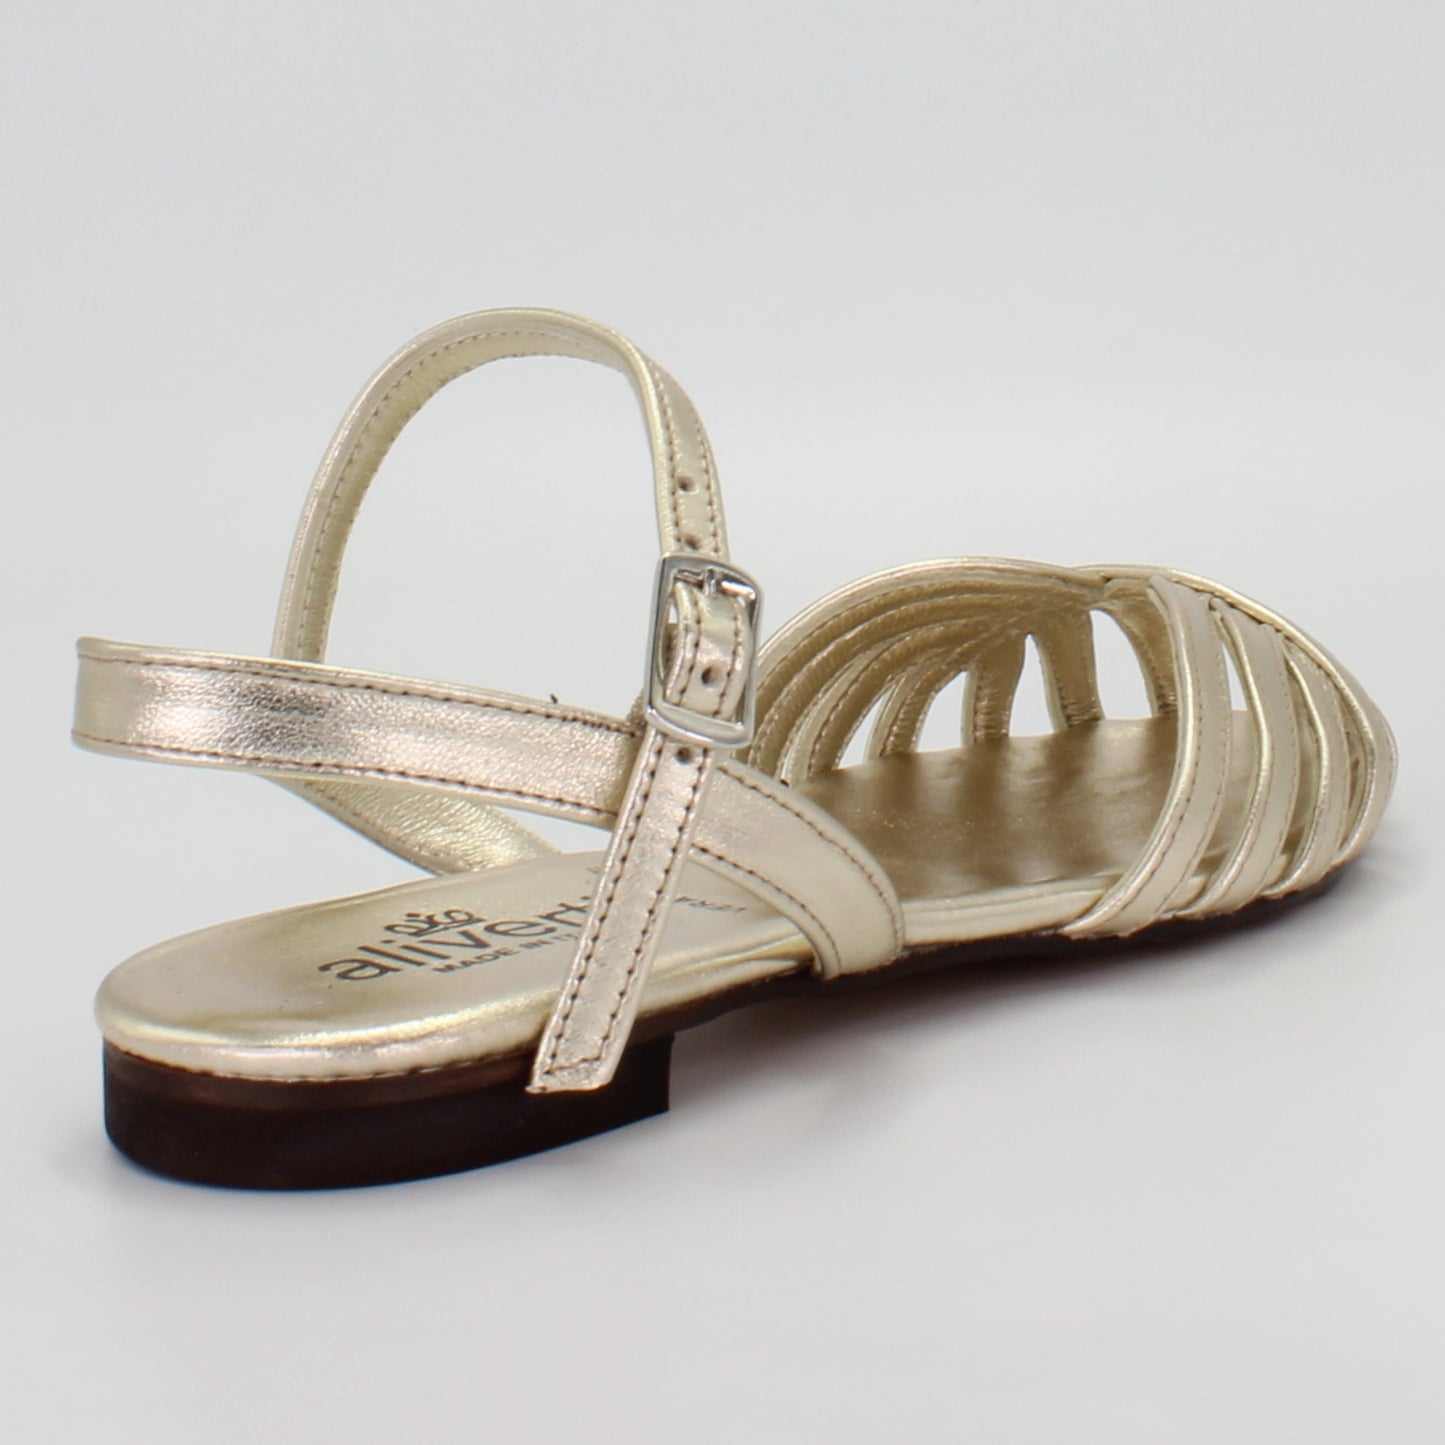 Shop Handmade Italian Leather sandal in platino (G500) or browse our range of hand-made Italian shoes in leather or suede in-store at Aliverti Cape Town, or shop online. We deliver in South Africa & offer multiple payment plans as well as accept multiple safe & secure payment methods.